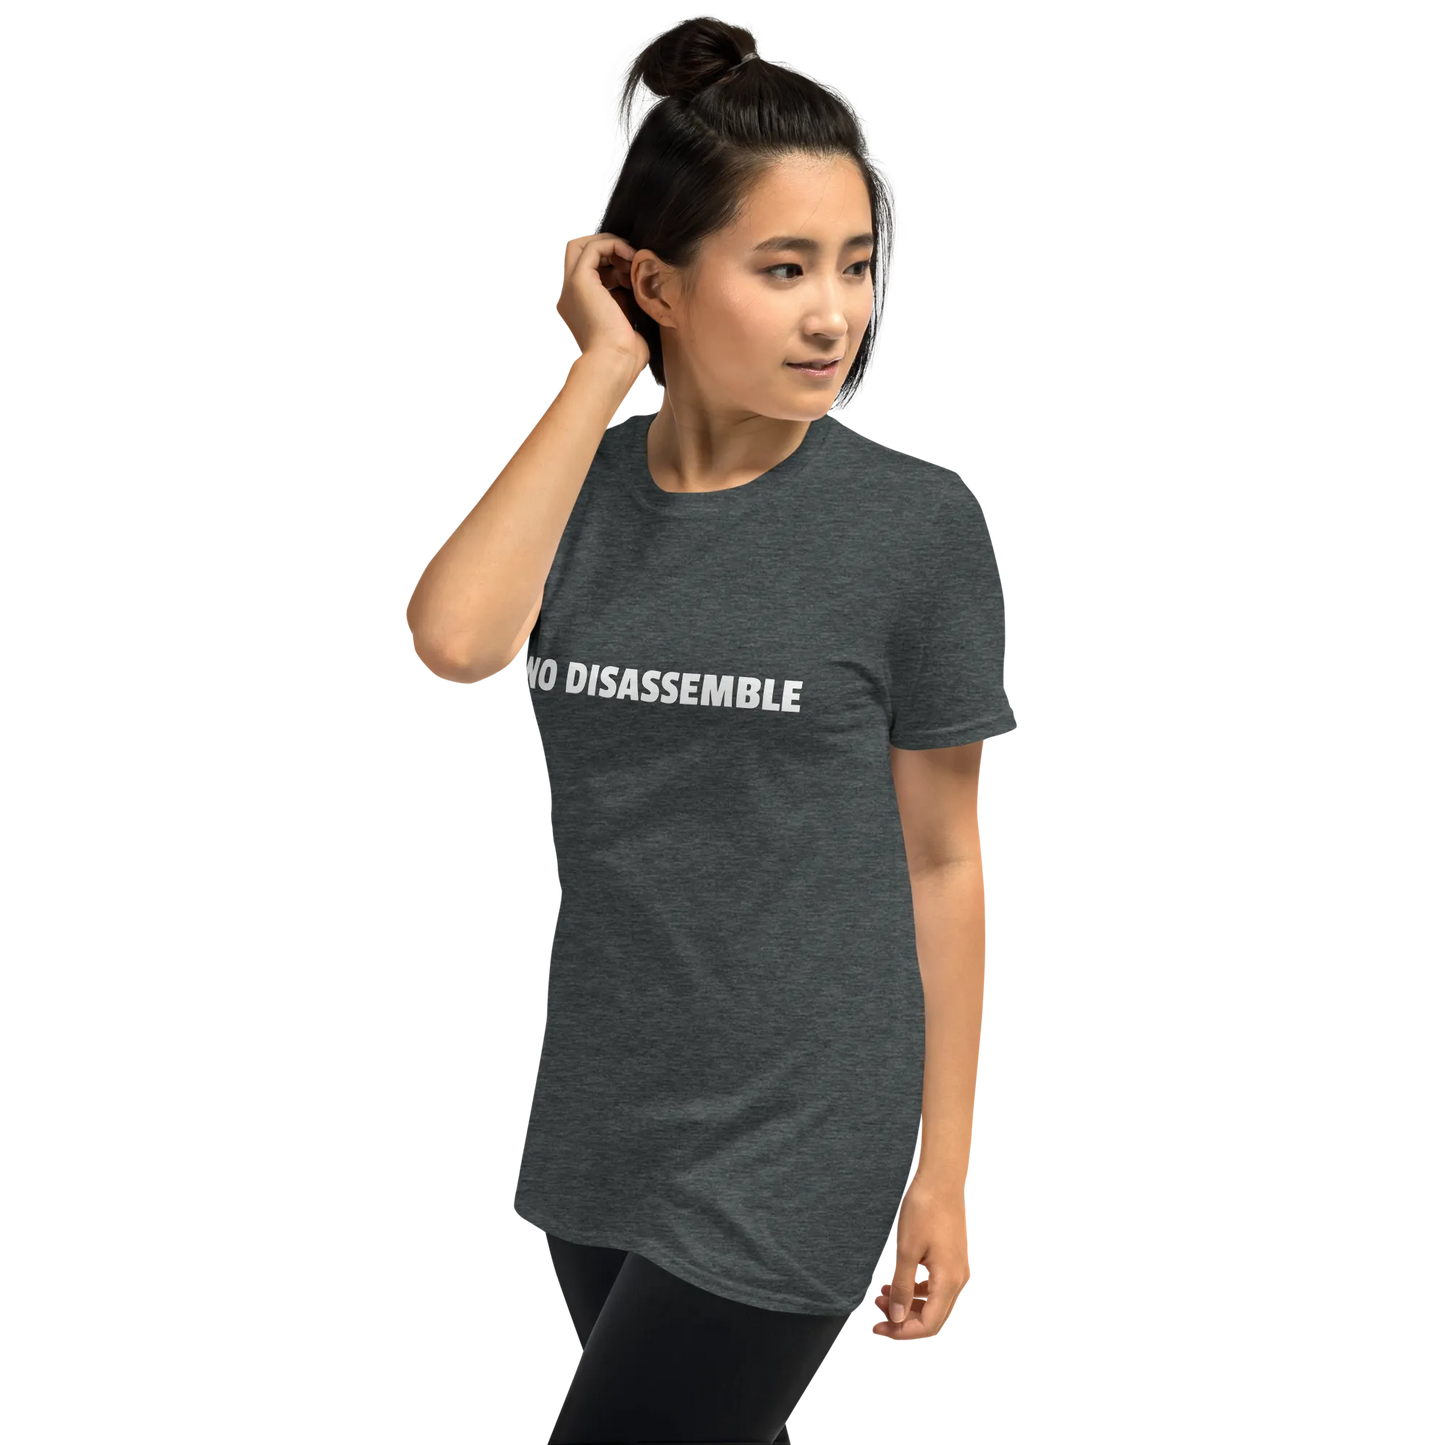 No Disassemble Tee in Dark Heather Grey on woman left